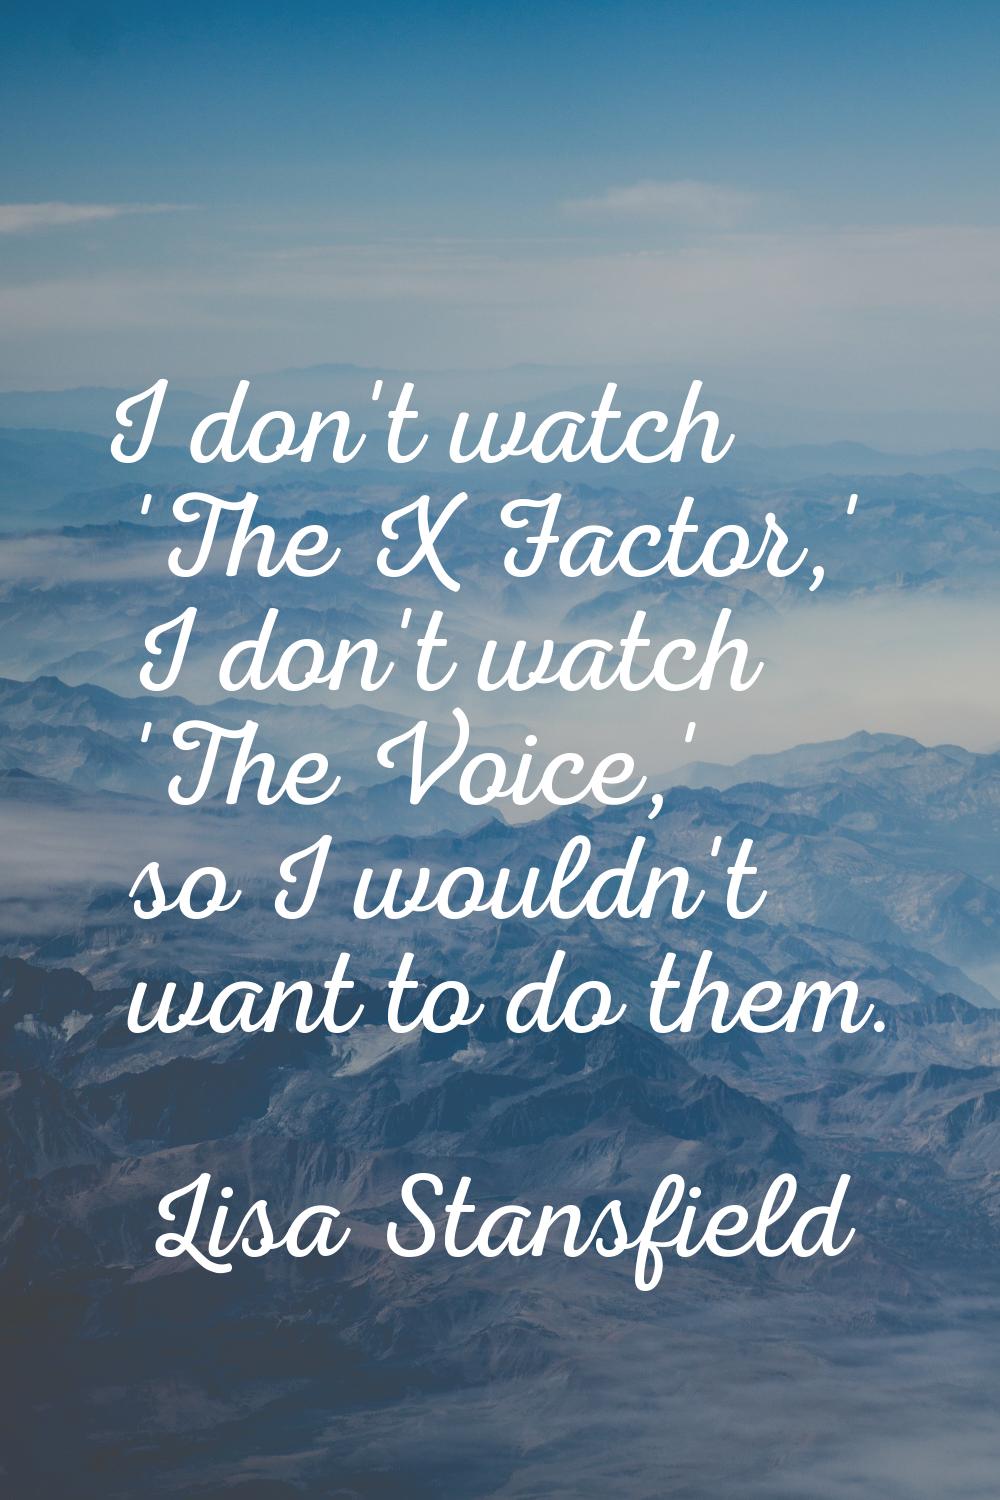 I don't watch 'The X Factor,' I don't watch 'The Voice,' so I wouldn't want to do them.